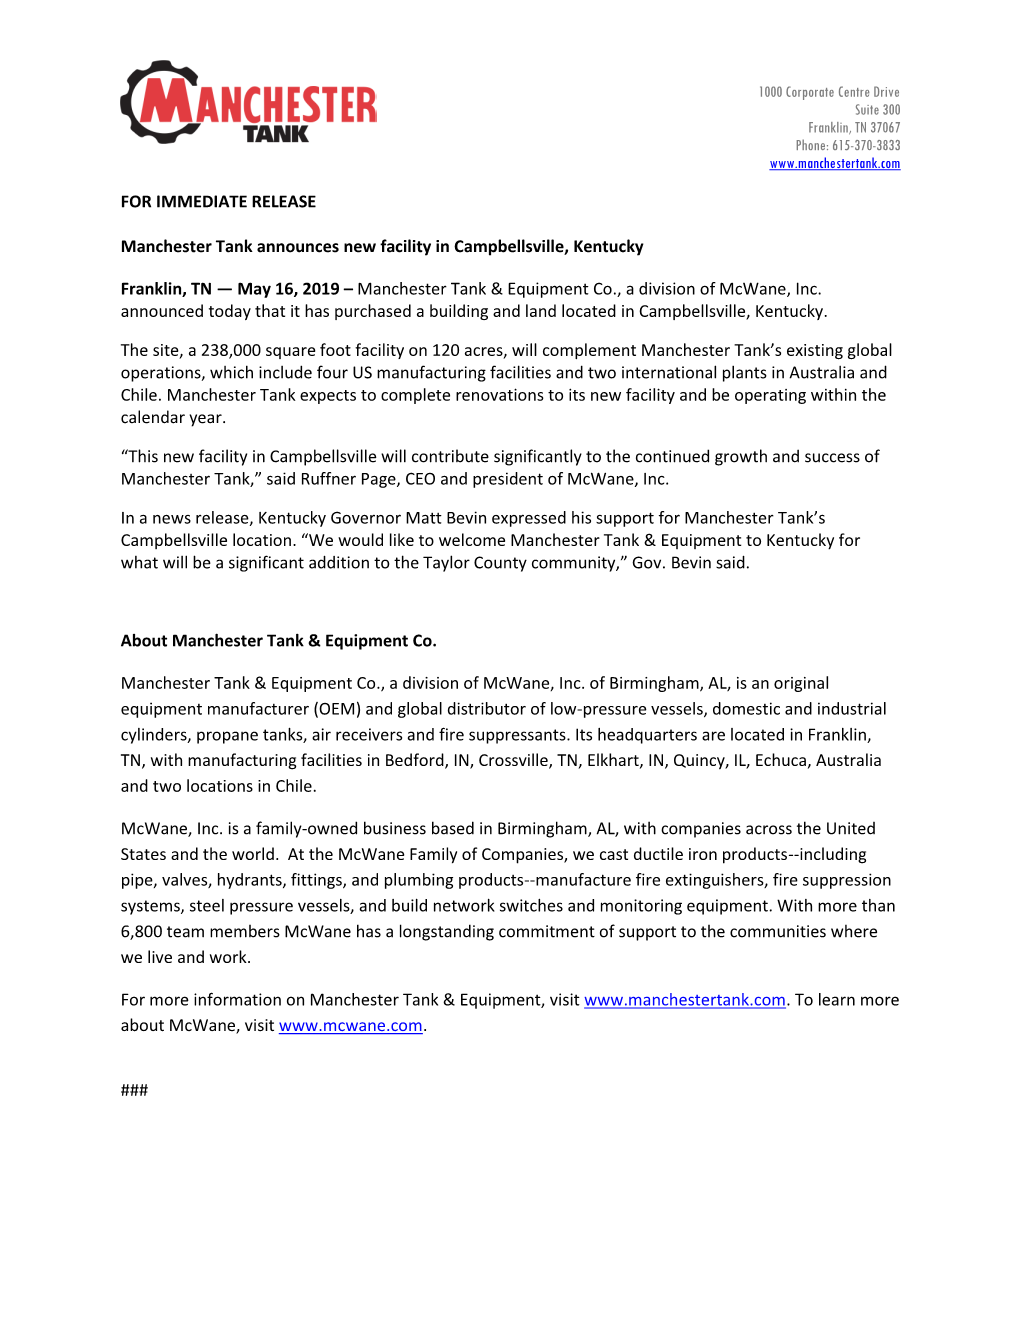 FOR IMMEDIATE RELEASE Manchester Tank Announces New Facility in Campbellsville, Kentucky Franklin, TN — May 16, 2019 – Manch